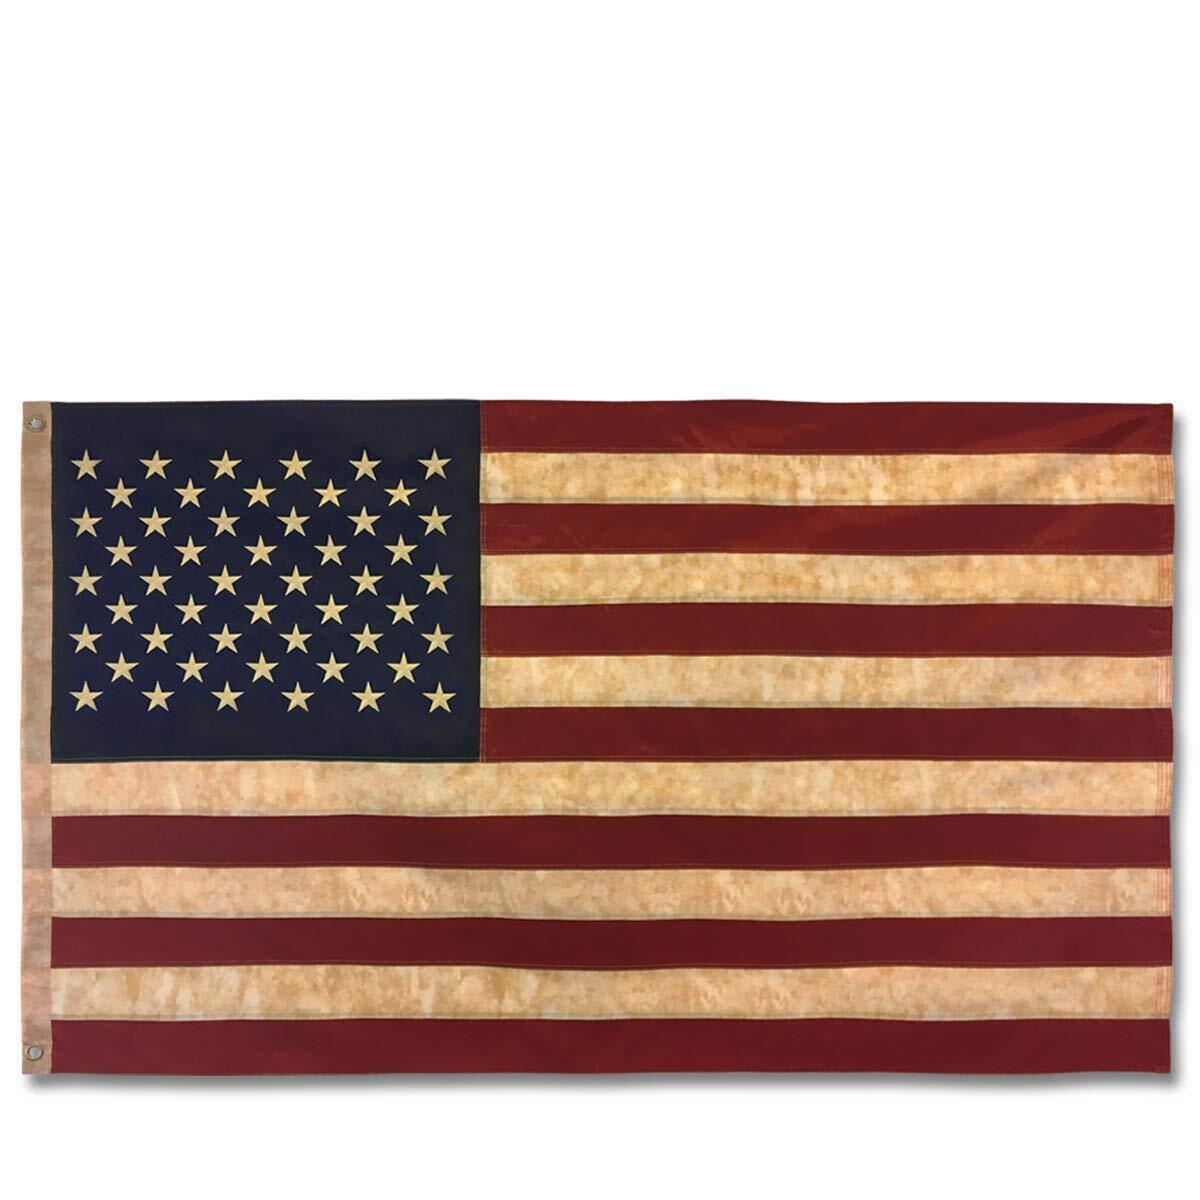 Embroidered Vintage American Flag- Premium Quality Oxford Poly - 3'x5' Vintag...